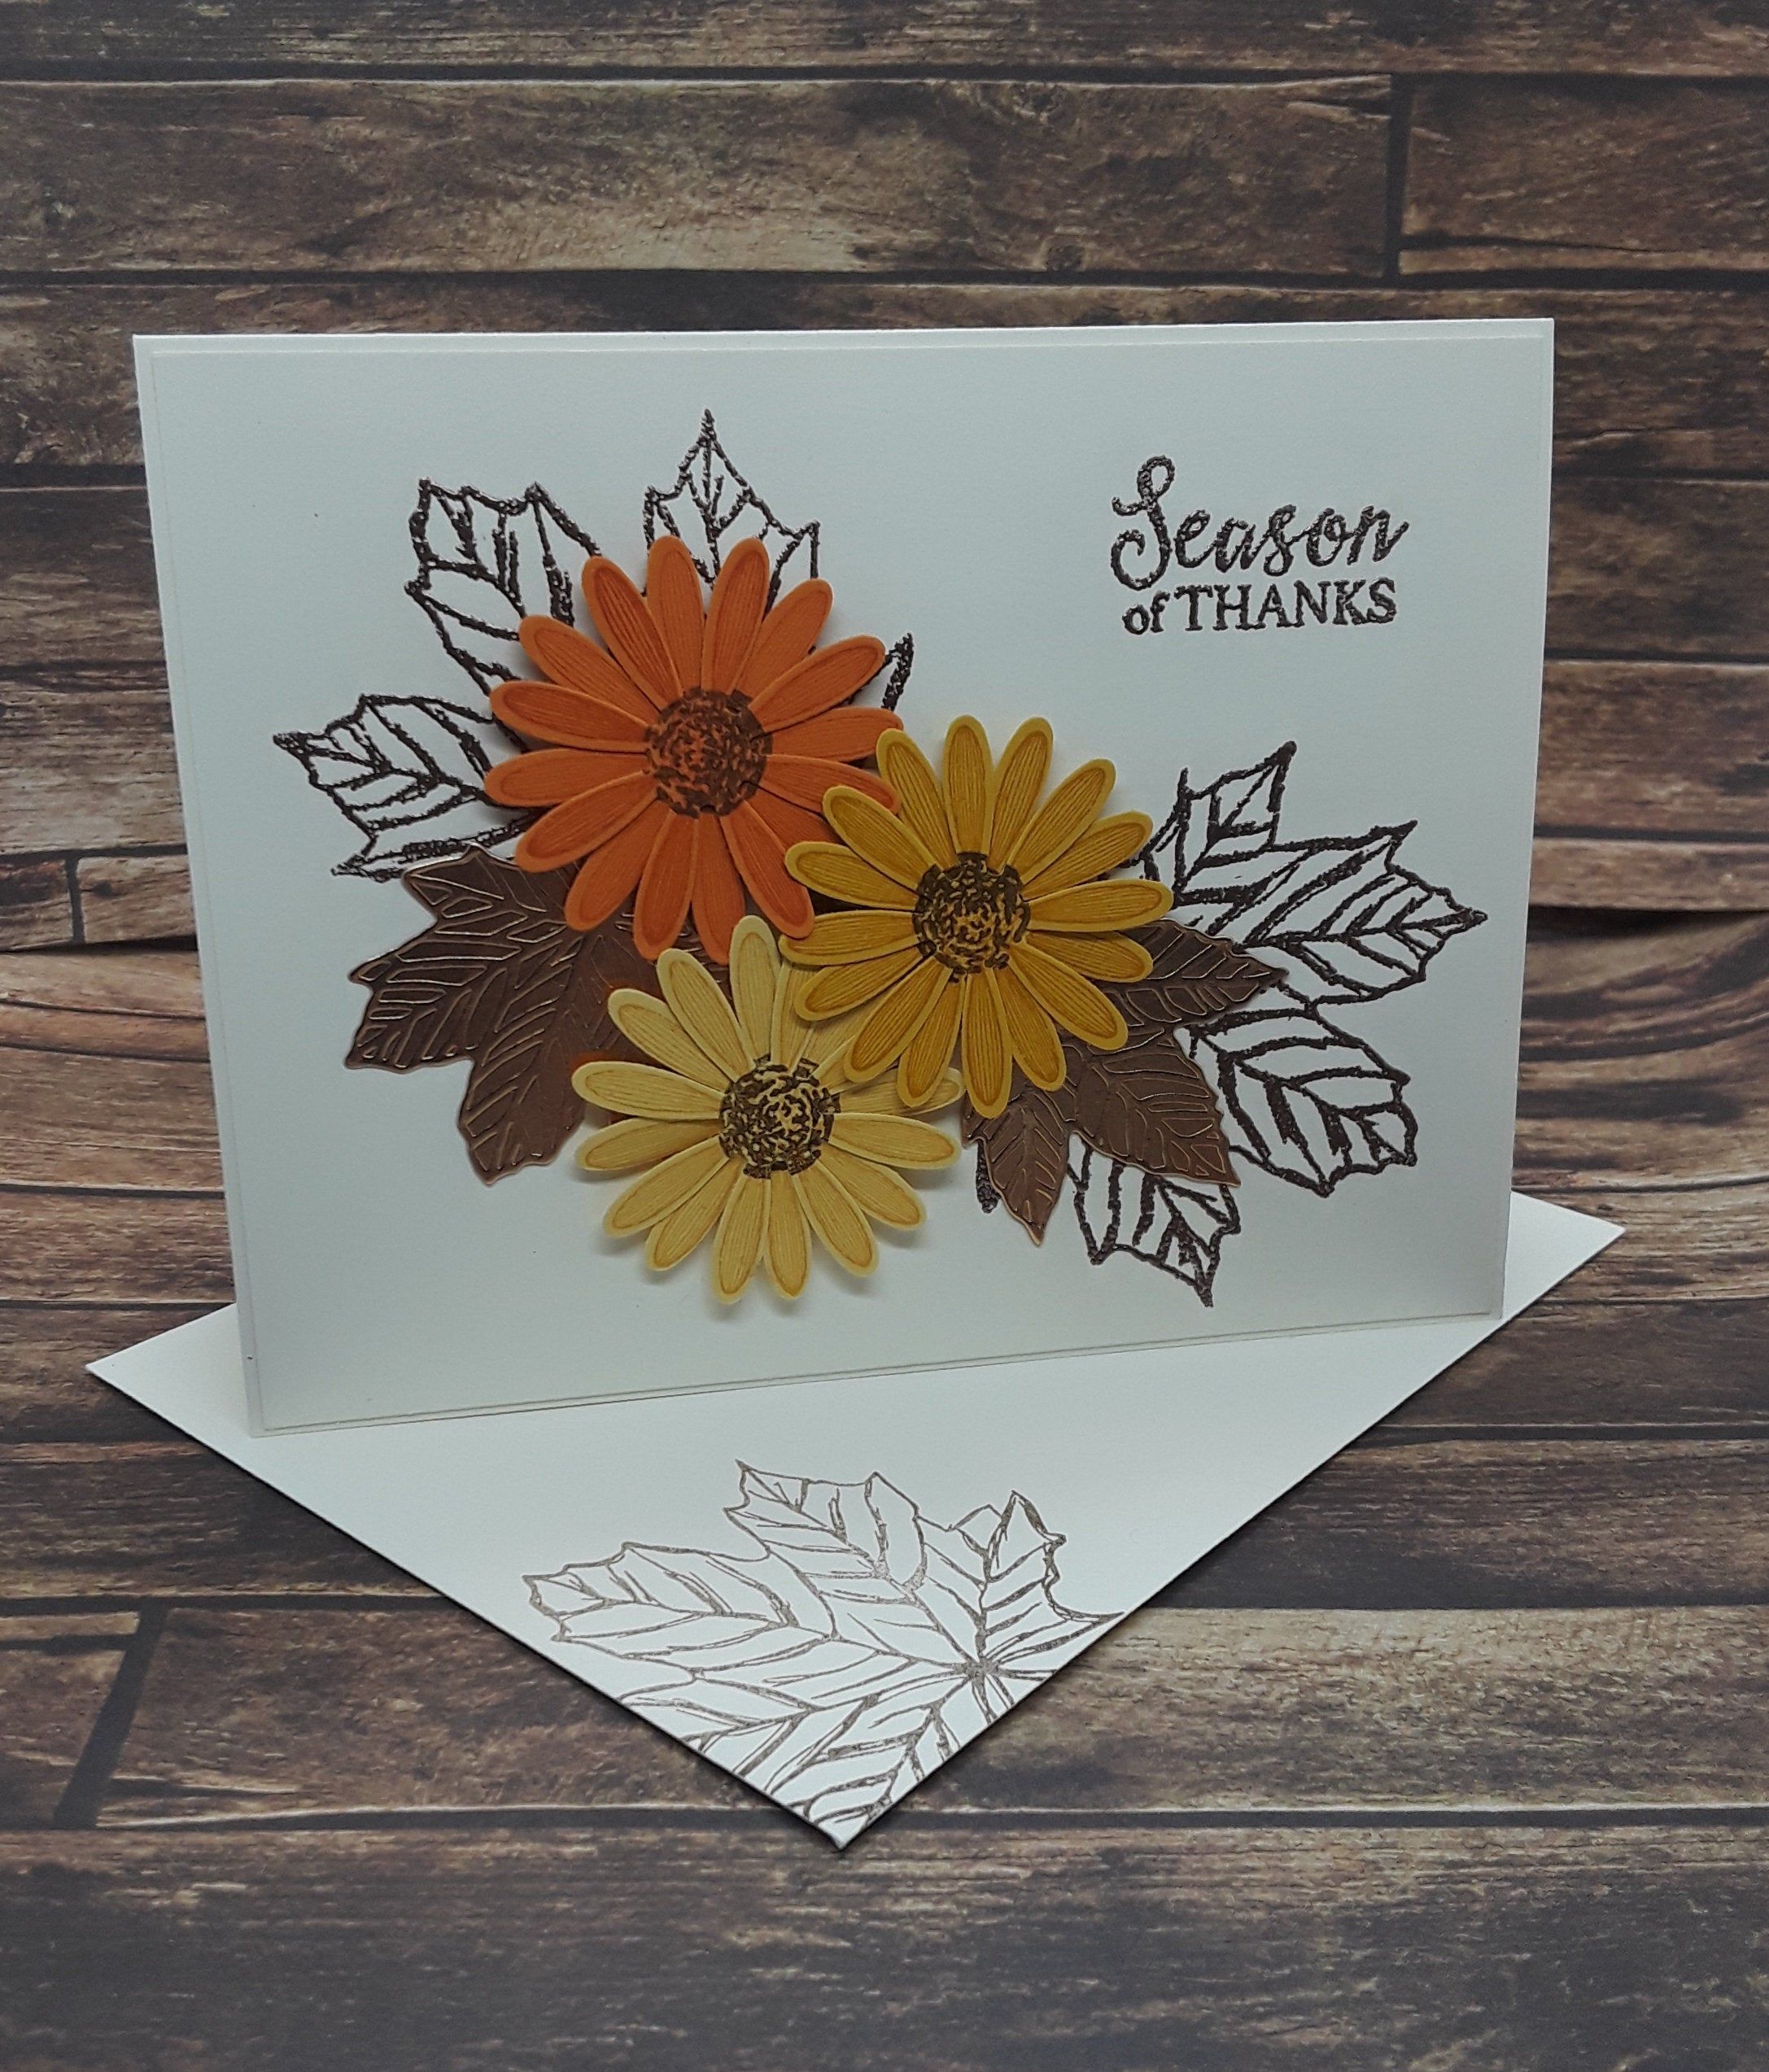 Season of Thanks Stampin' Up! Fall Thanksgiving Day Holiday Greeting Card Handmade Handstamped - Season of Thanks Stampin' Up! Fall Thanksgiving Day Holiday Greeting Card Handmade Handstamped -   16 diy thanksgiving cards handmade ideas